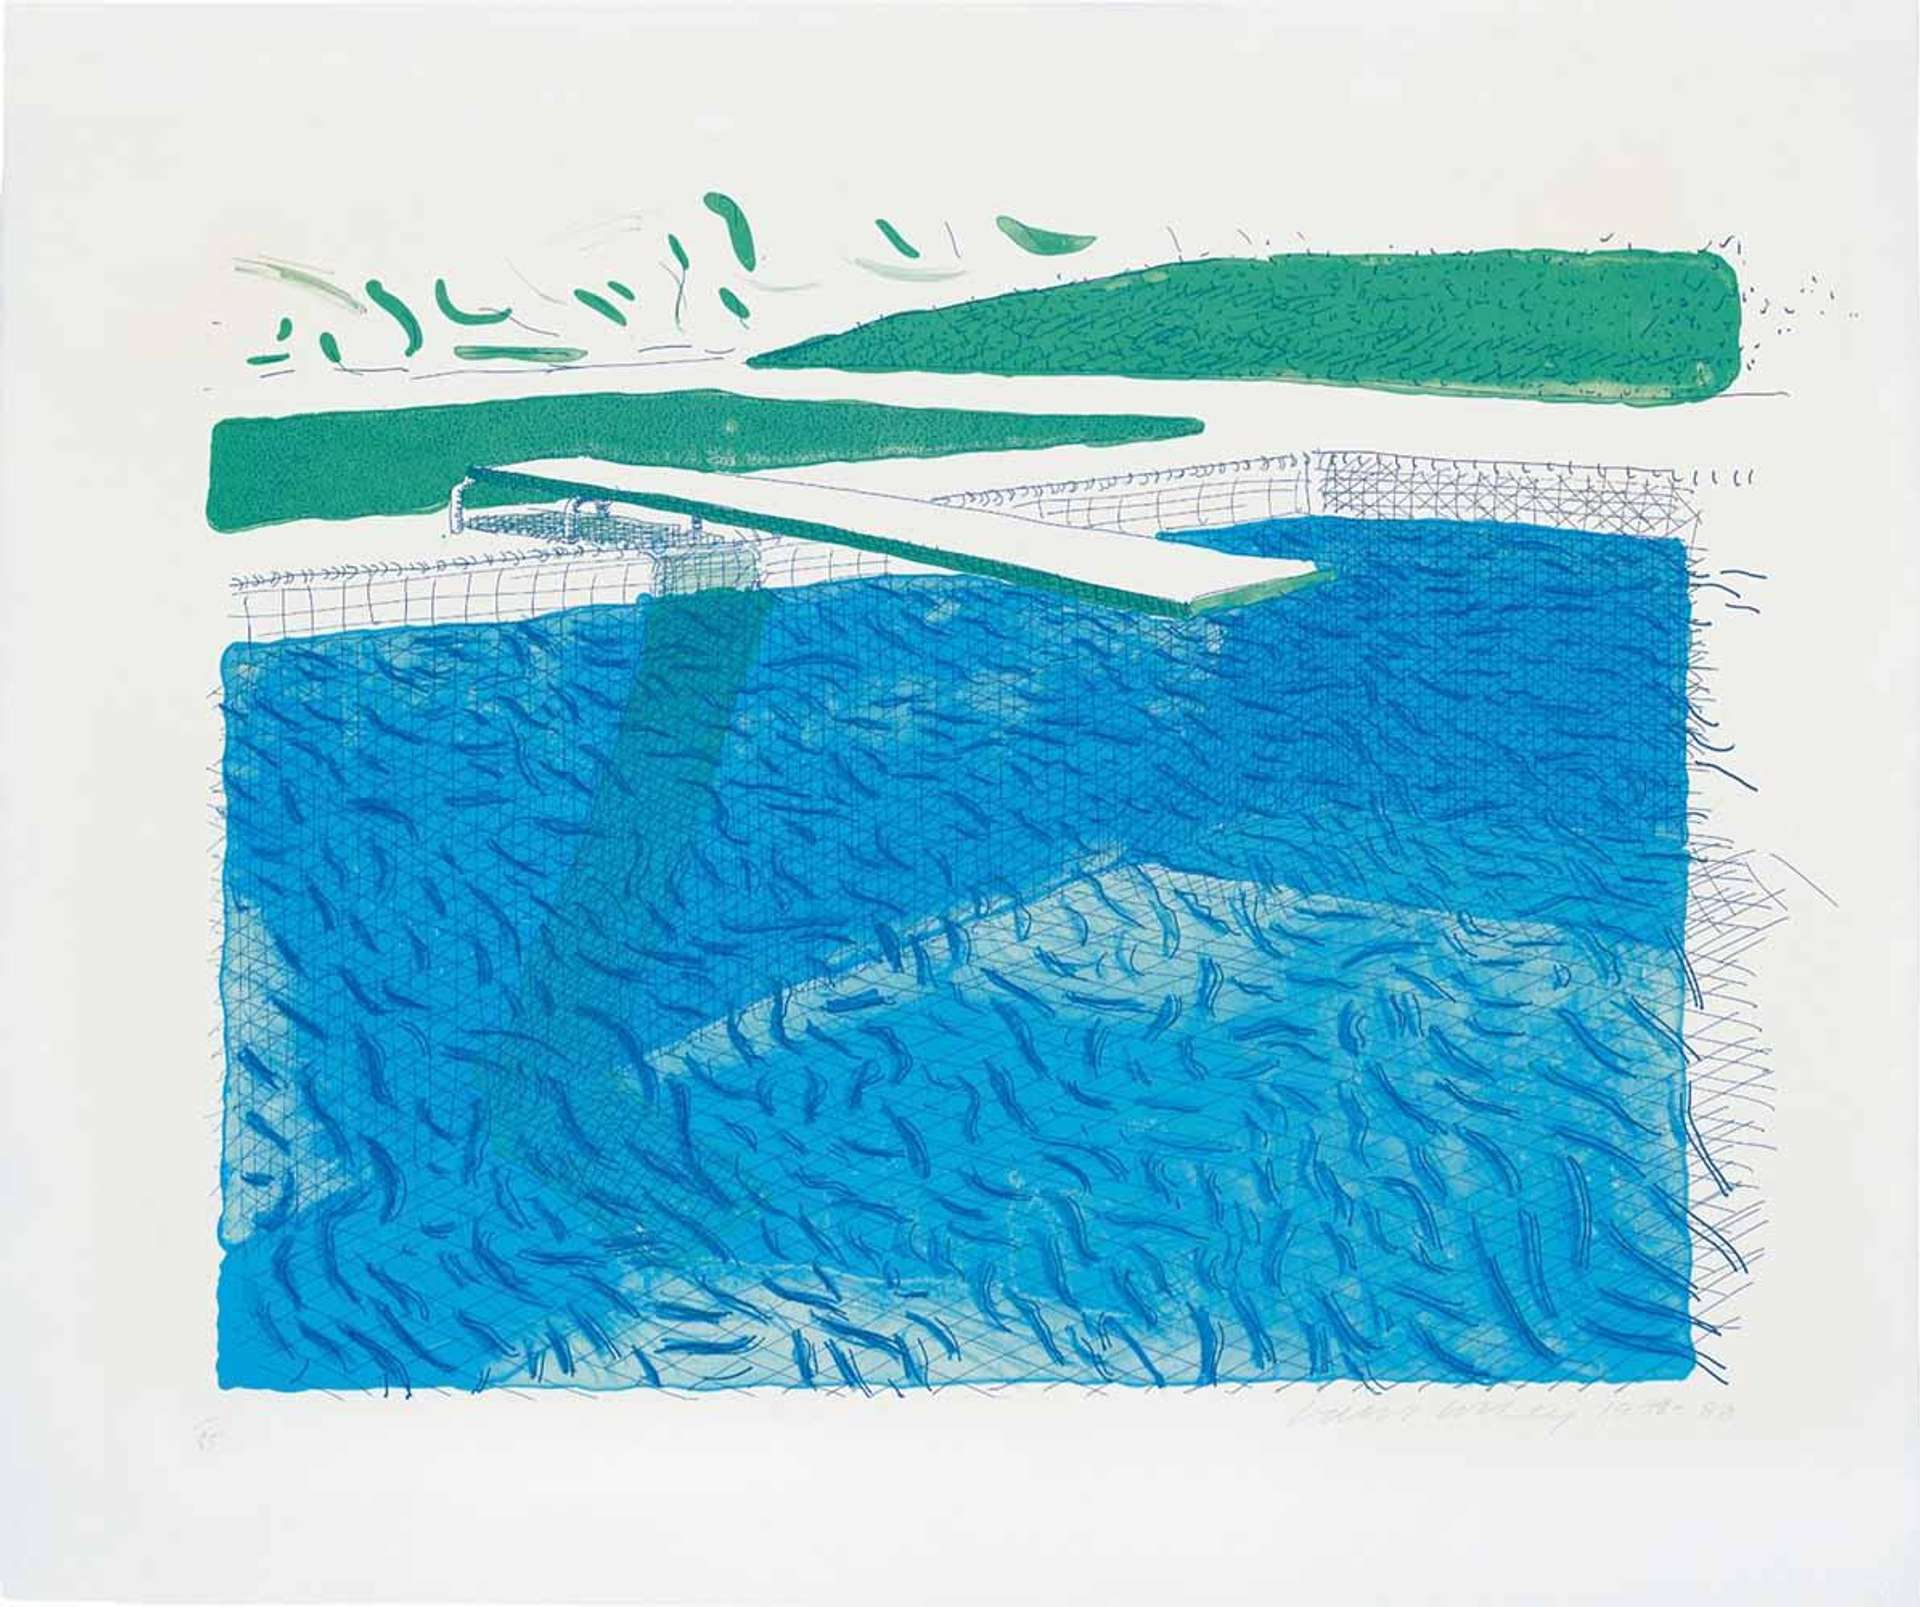 A lithographic print by David Hockney depicting a swimming board with a diving board extending towards the centre of the composition, with the waves of the water delineated with short wavy lines in blue.